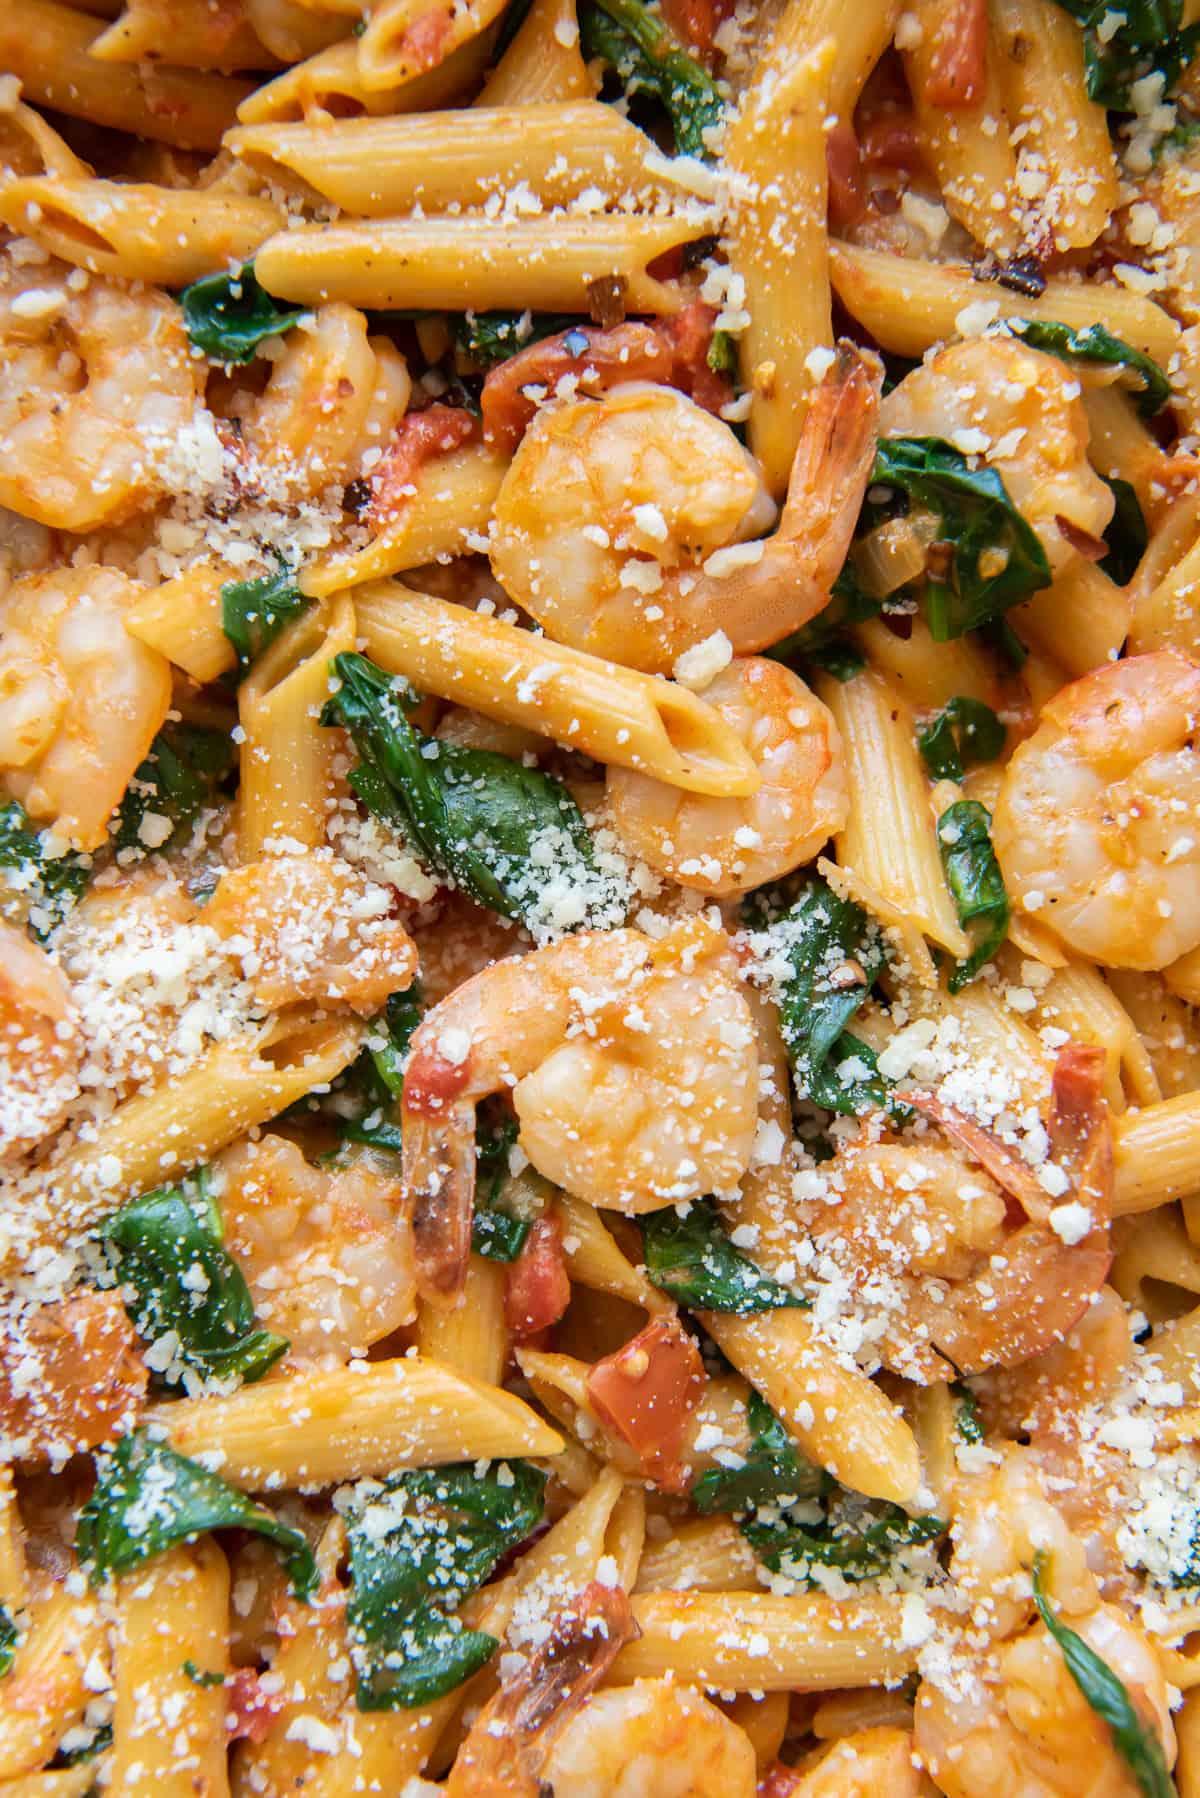 A close up of Shrimp and Spinach Pasta with Parmesan cheese.